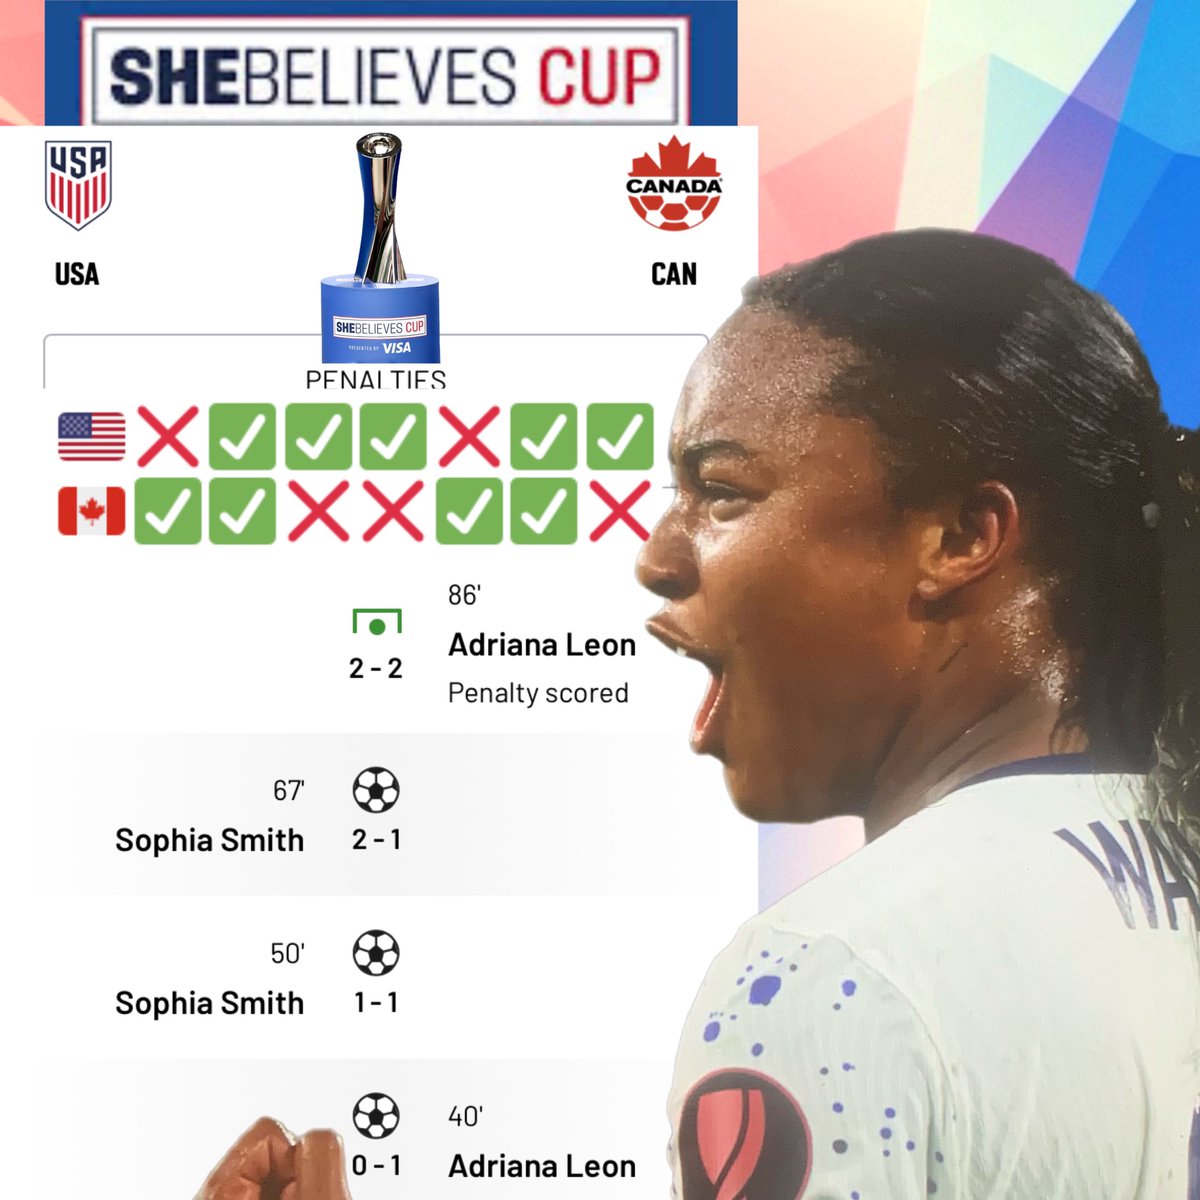 🇺🇸🇺🇸🇺🇸🇺🇸USA🇺🇸🇺🇸🇺🇸🇺🇸 Taking home the 🏆🏆🏆 @Concacaf @SheBelievesCup @TwilaKilgore @USWNT @JaedynShaw11 @CANWNT @Visa @adidas @Nike @Spotify